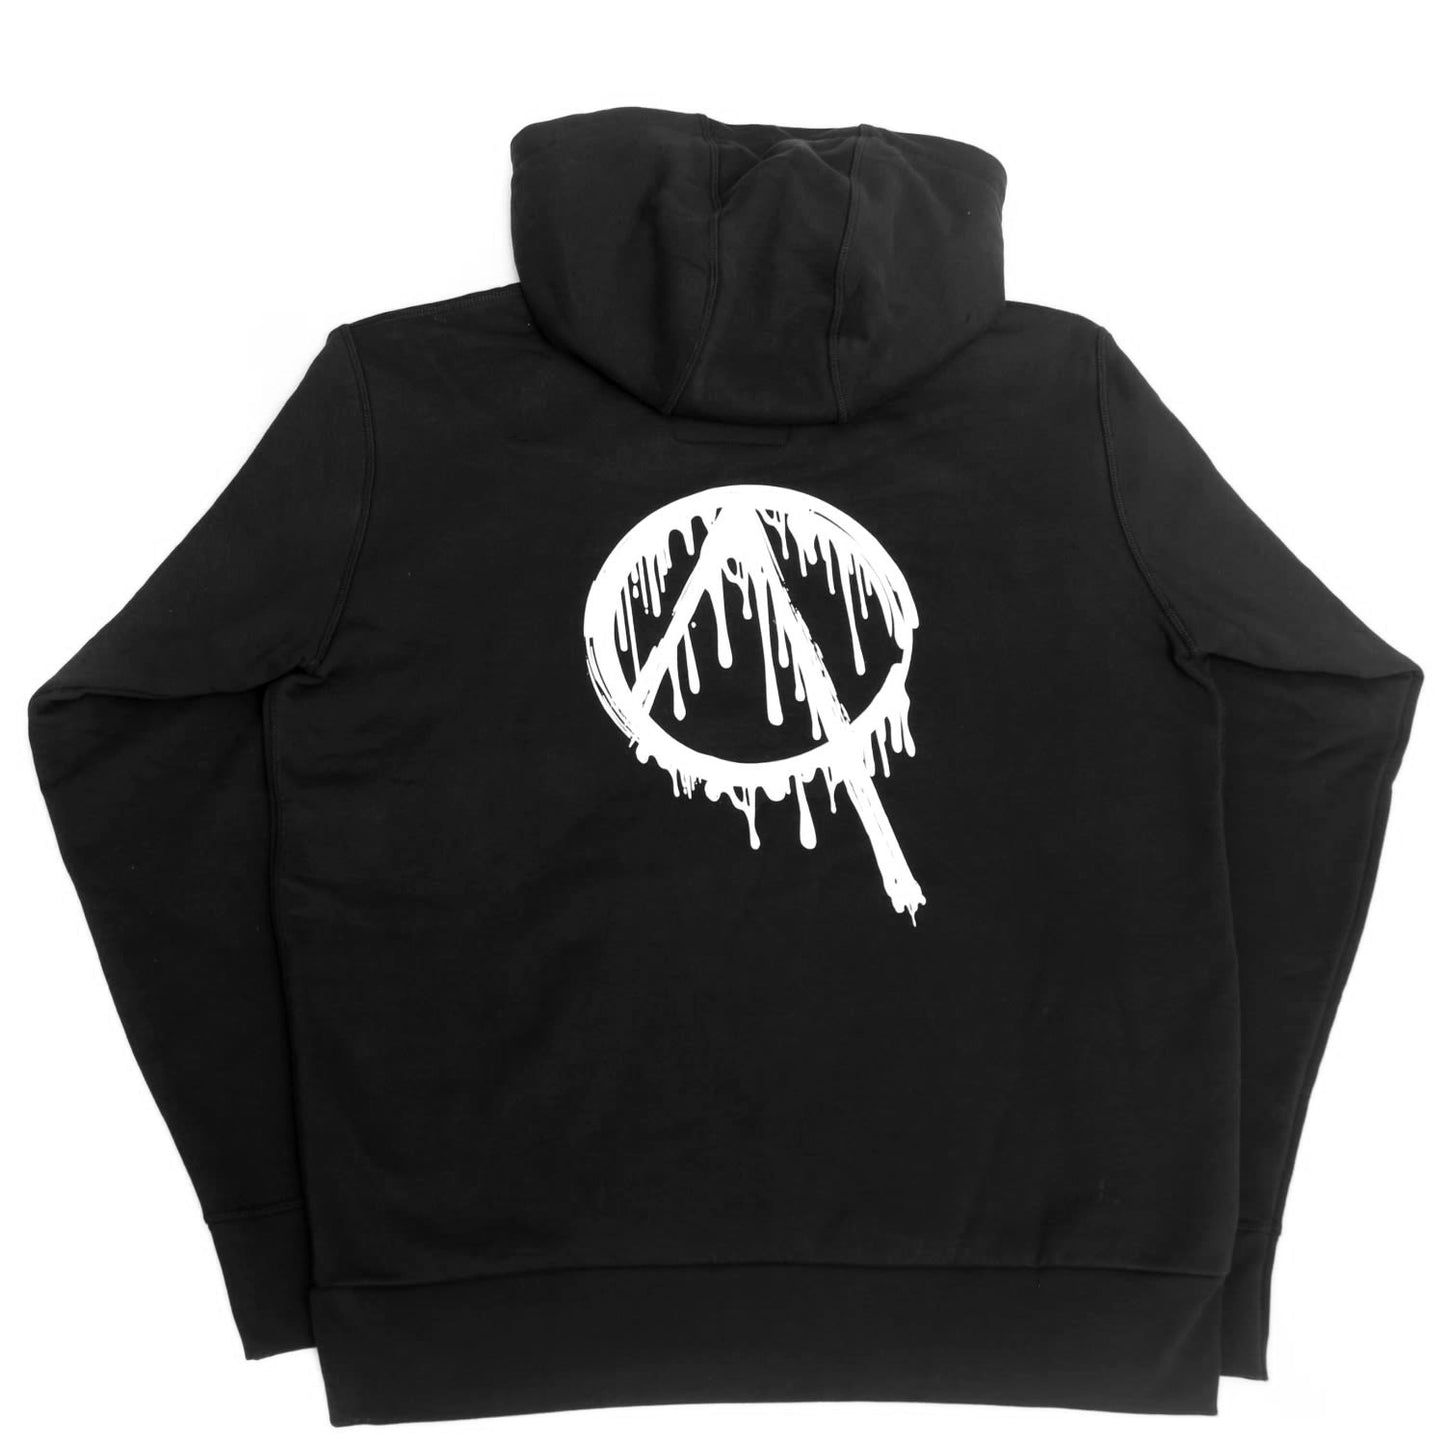 UPLAND PLASMA HEAVYWEIGHT HOODIE WITH EMBROIDERED LOGO AND BACK PRINT IN BLACK AND WHITE